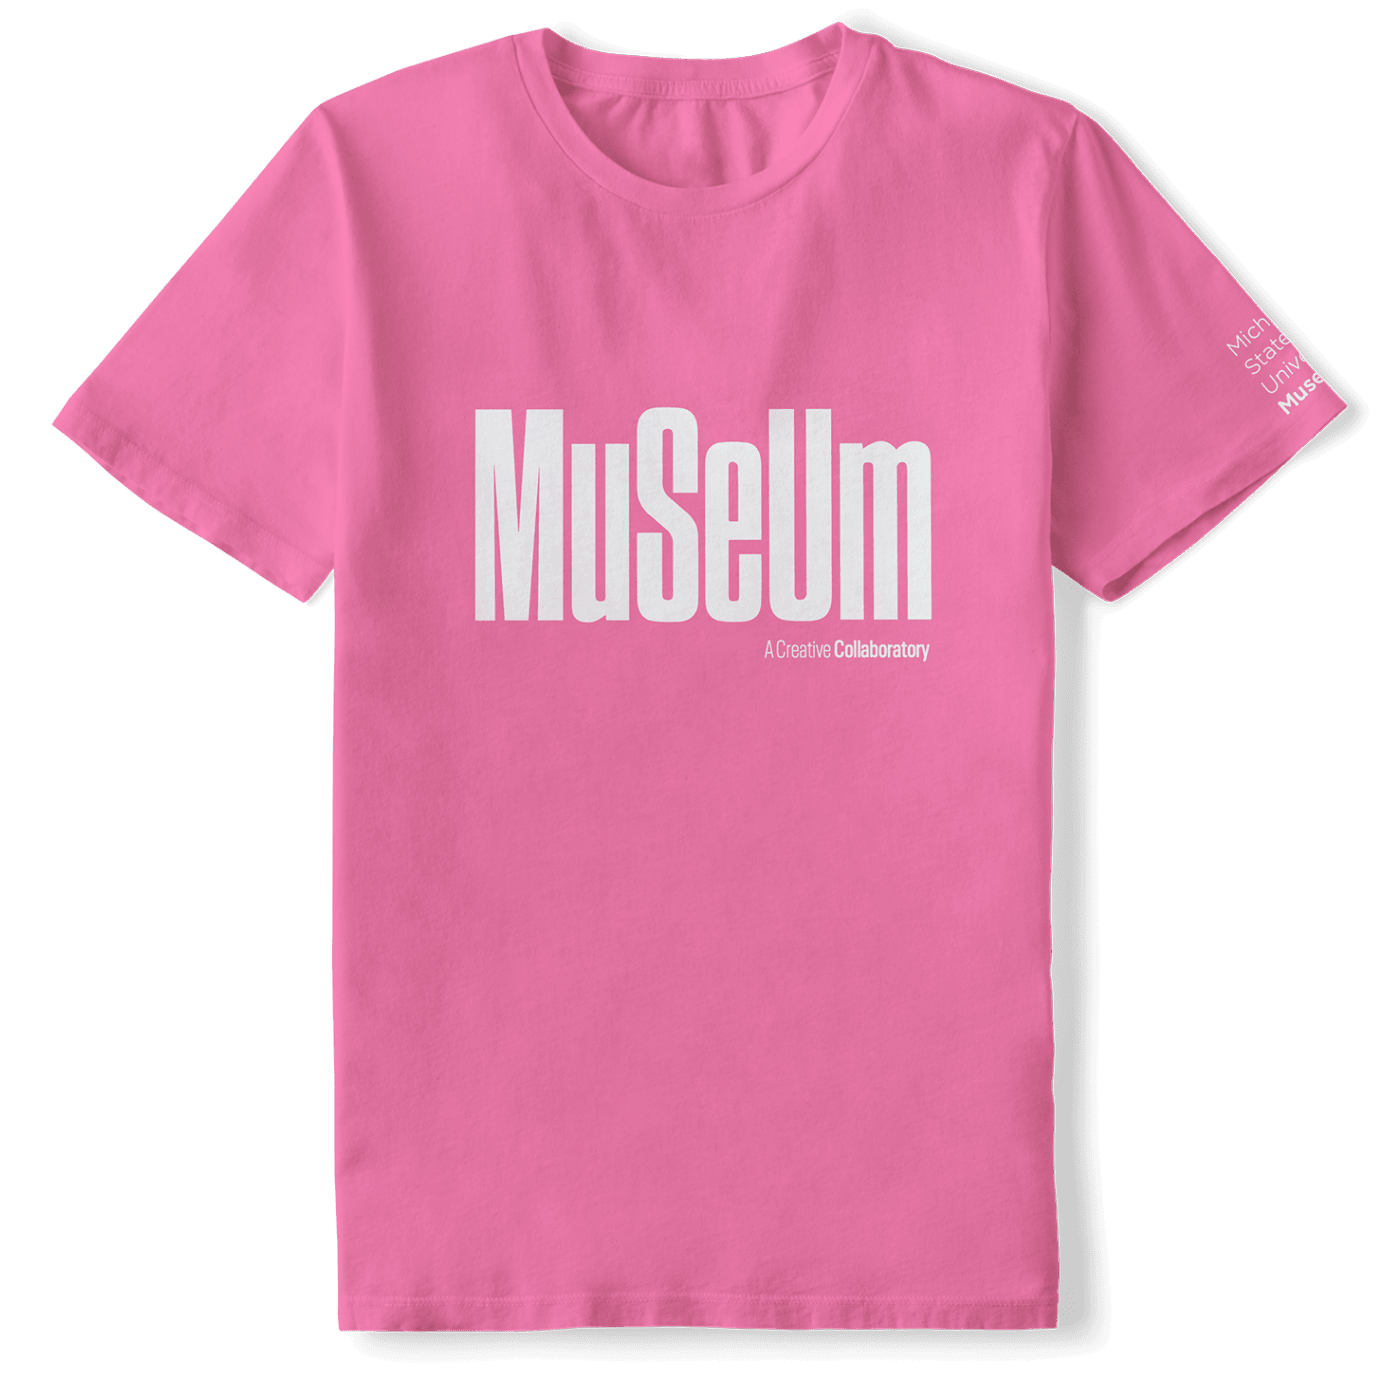 the new logo on a pink t-shirt